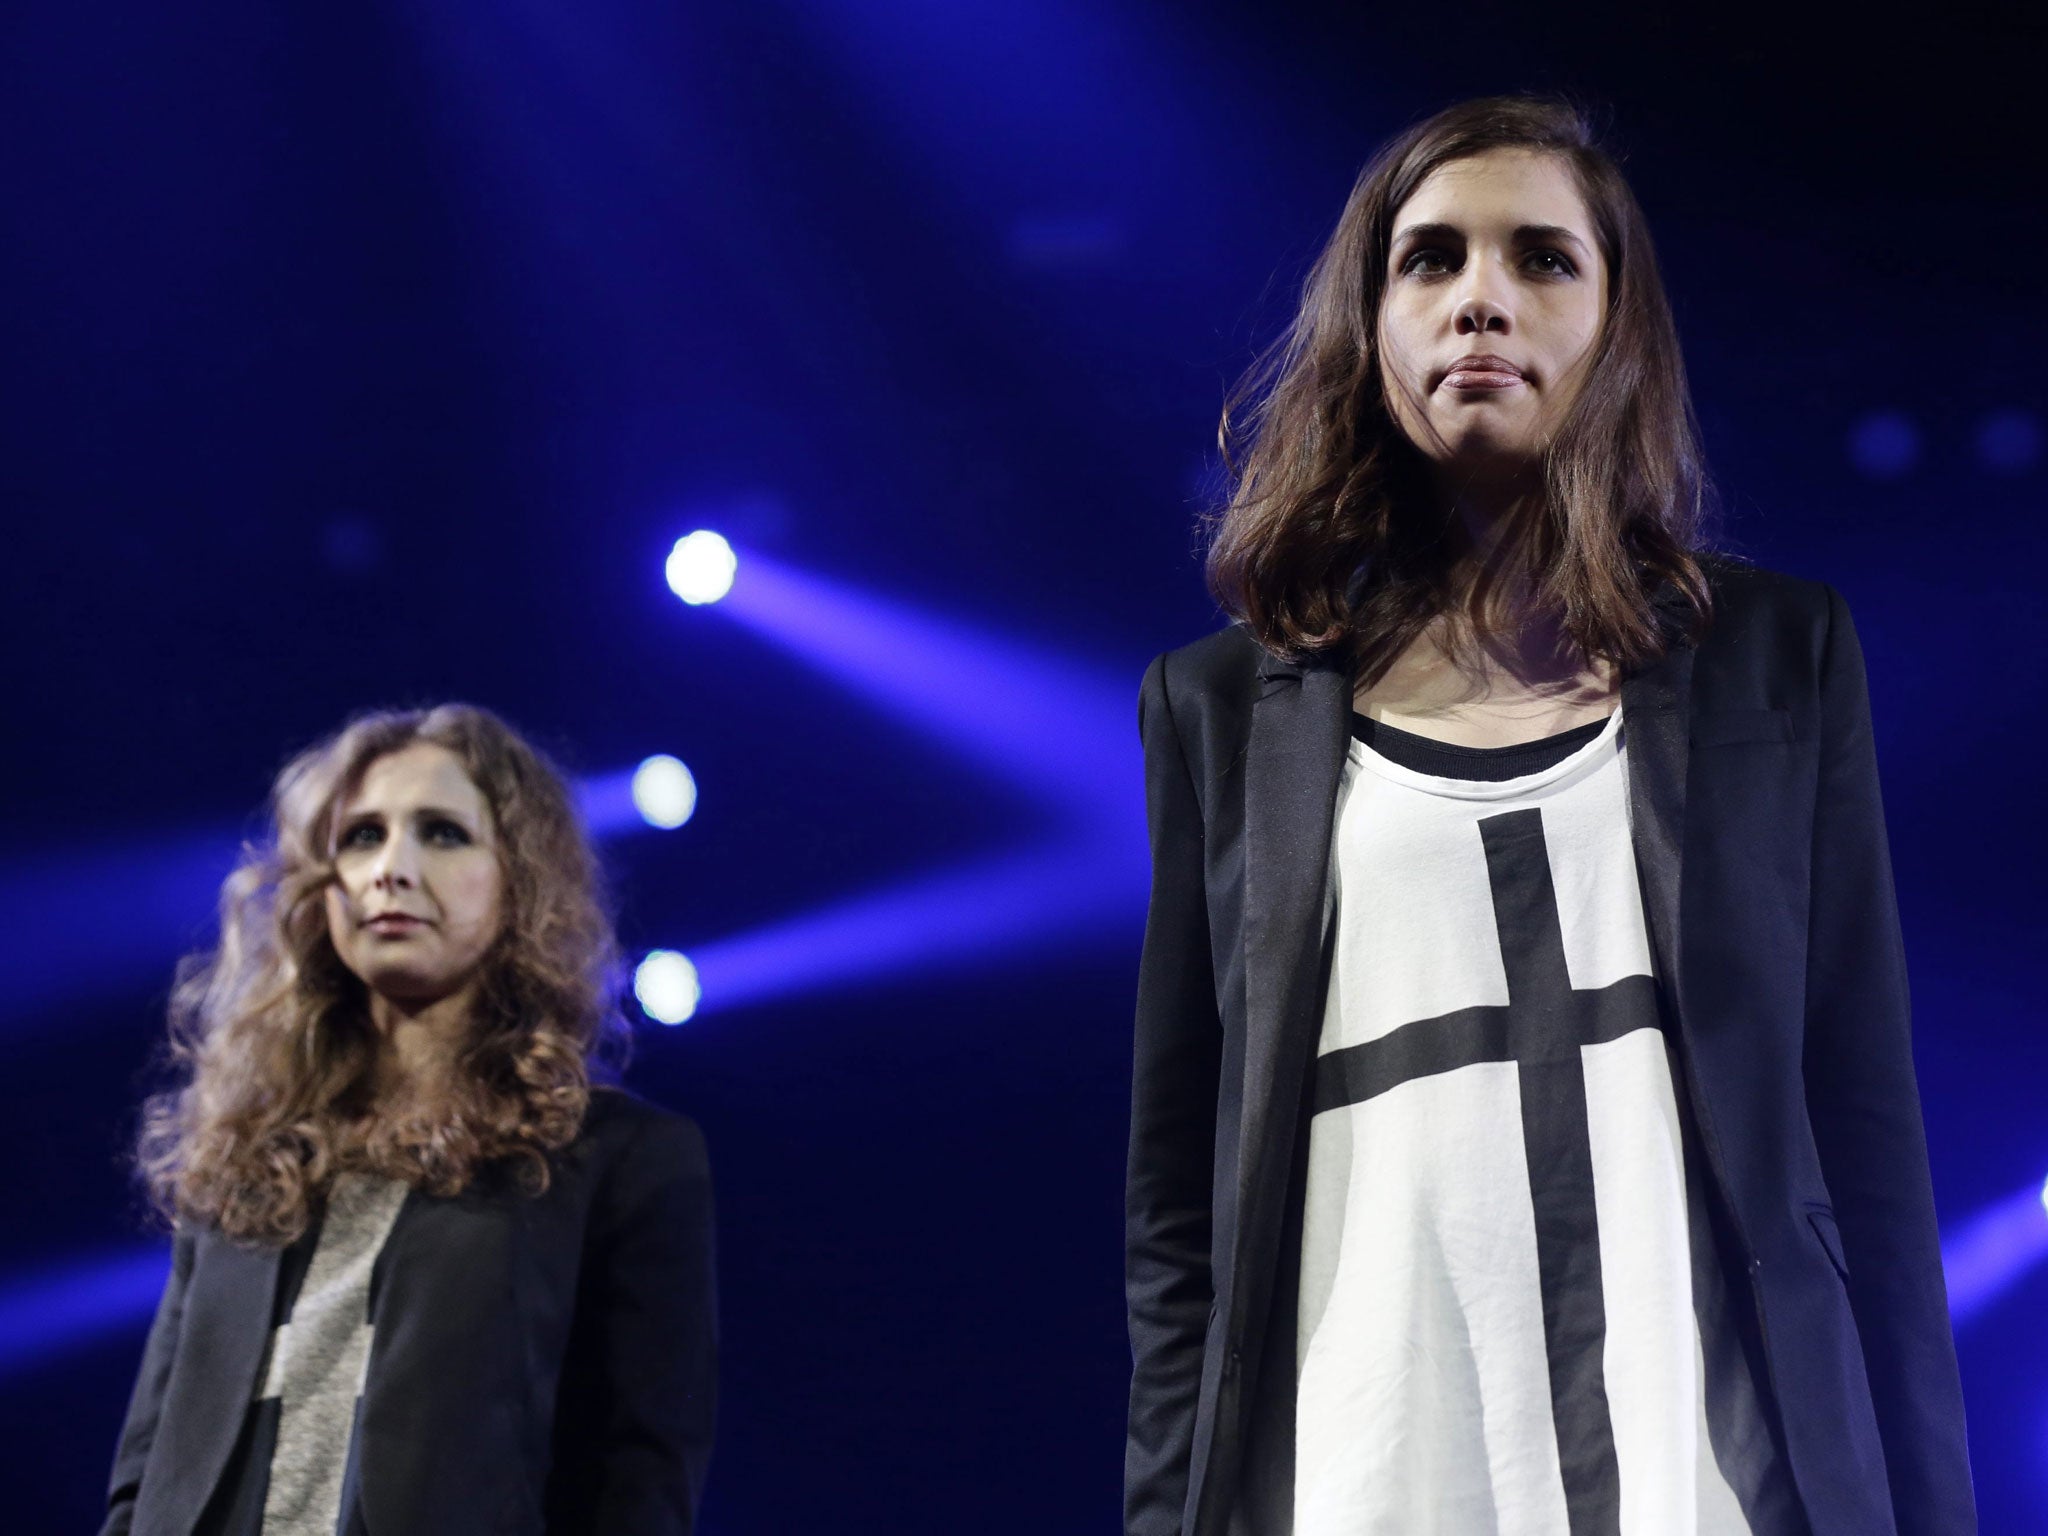 Maria Alyokhina (L) and Nadezhda Tolokonnikova (R) members of the Russian feminist punk rock protest group 'Pussy Riot' are seen on stage during the Amnesty International 'Bringing Human Rights Home' concert at the Barclays center in Brooklyn, New York, N